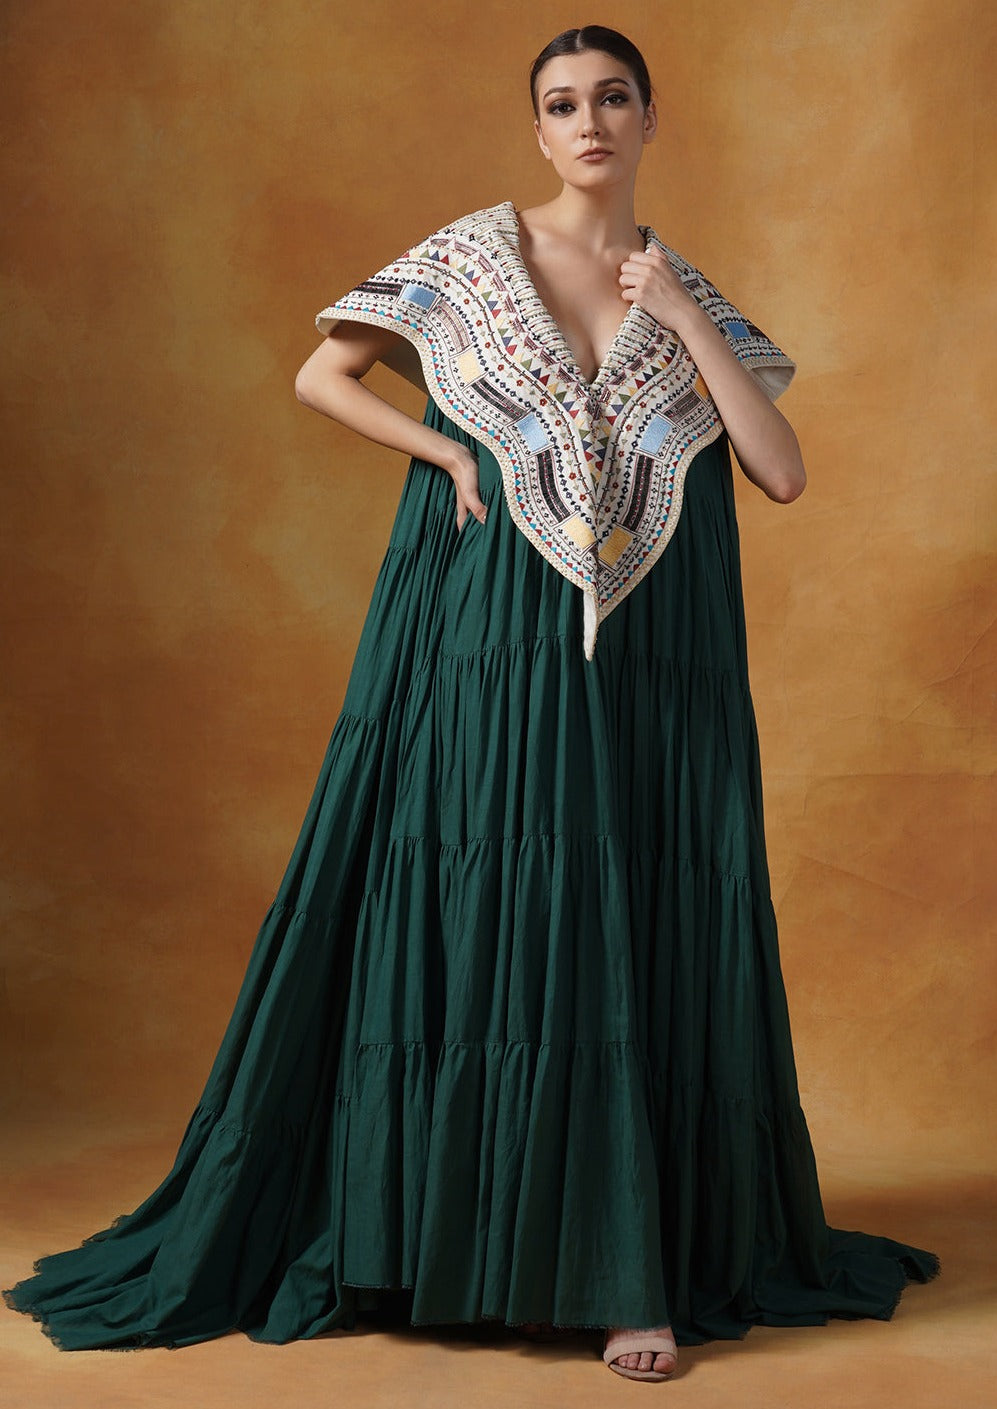 Floor length cotton tier dress in olive green. It is topped with a heavy embroidered cape around the neckline and shoulders.